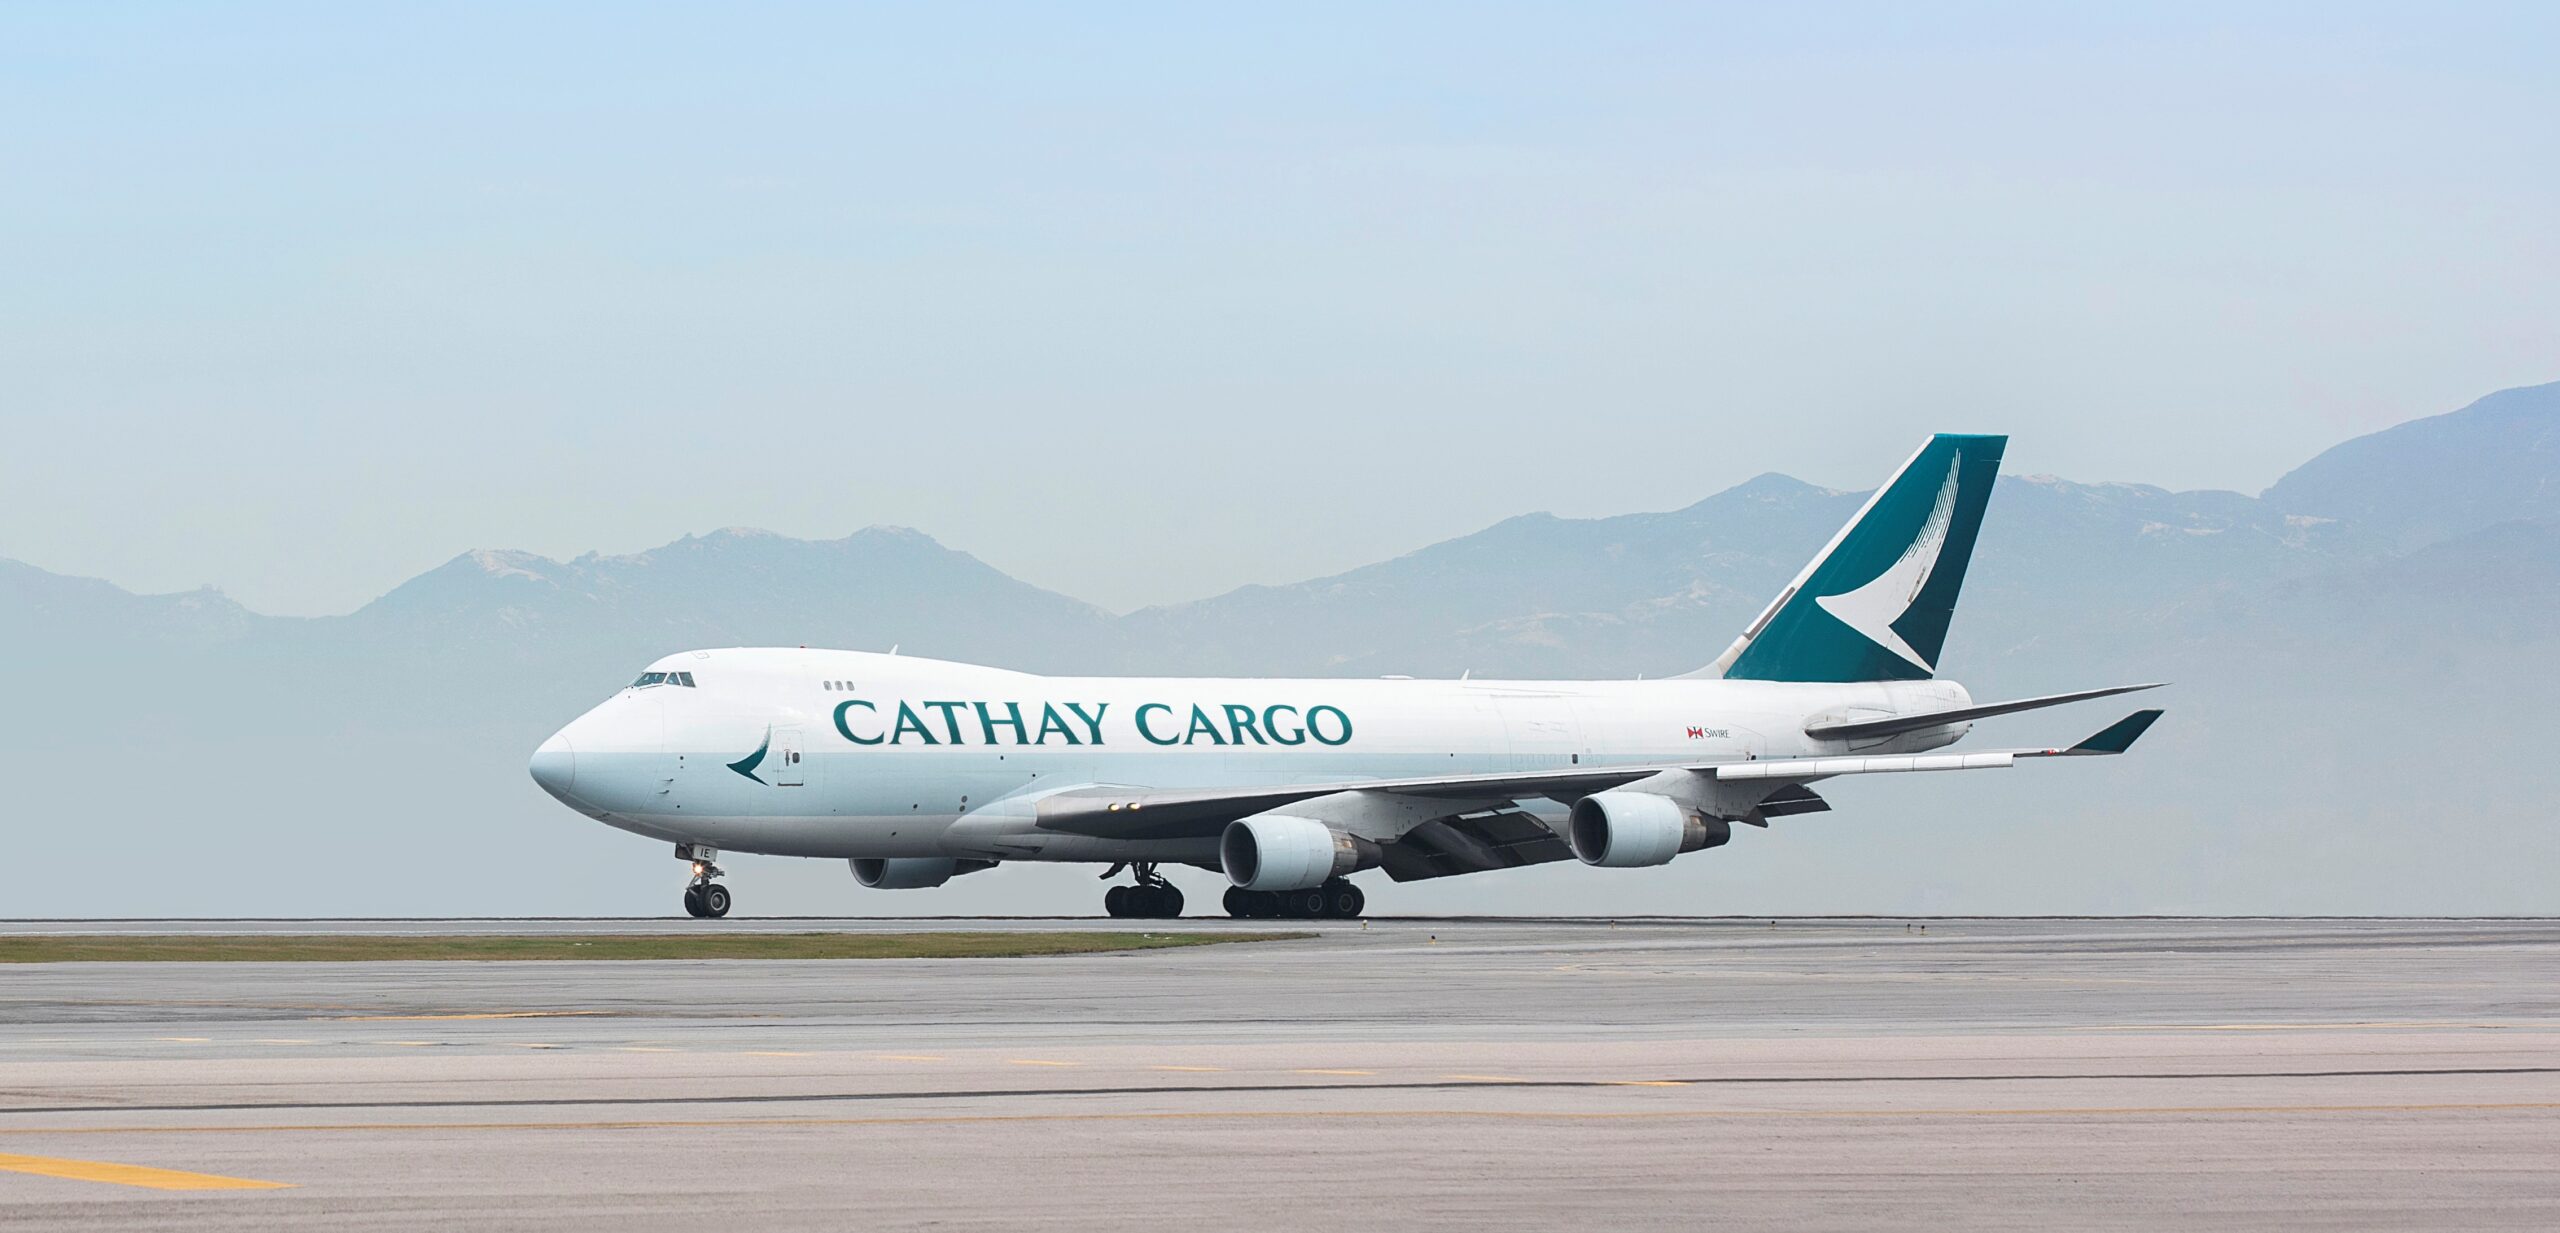 https://www.airportspotting.com/wp-content/uploads/2023/02/Cathay-Cargo-scaled.jpg